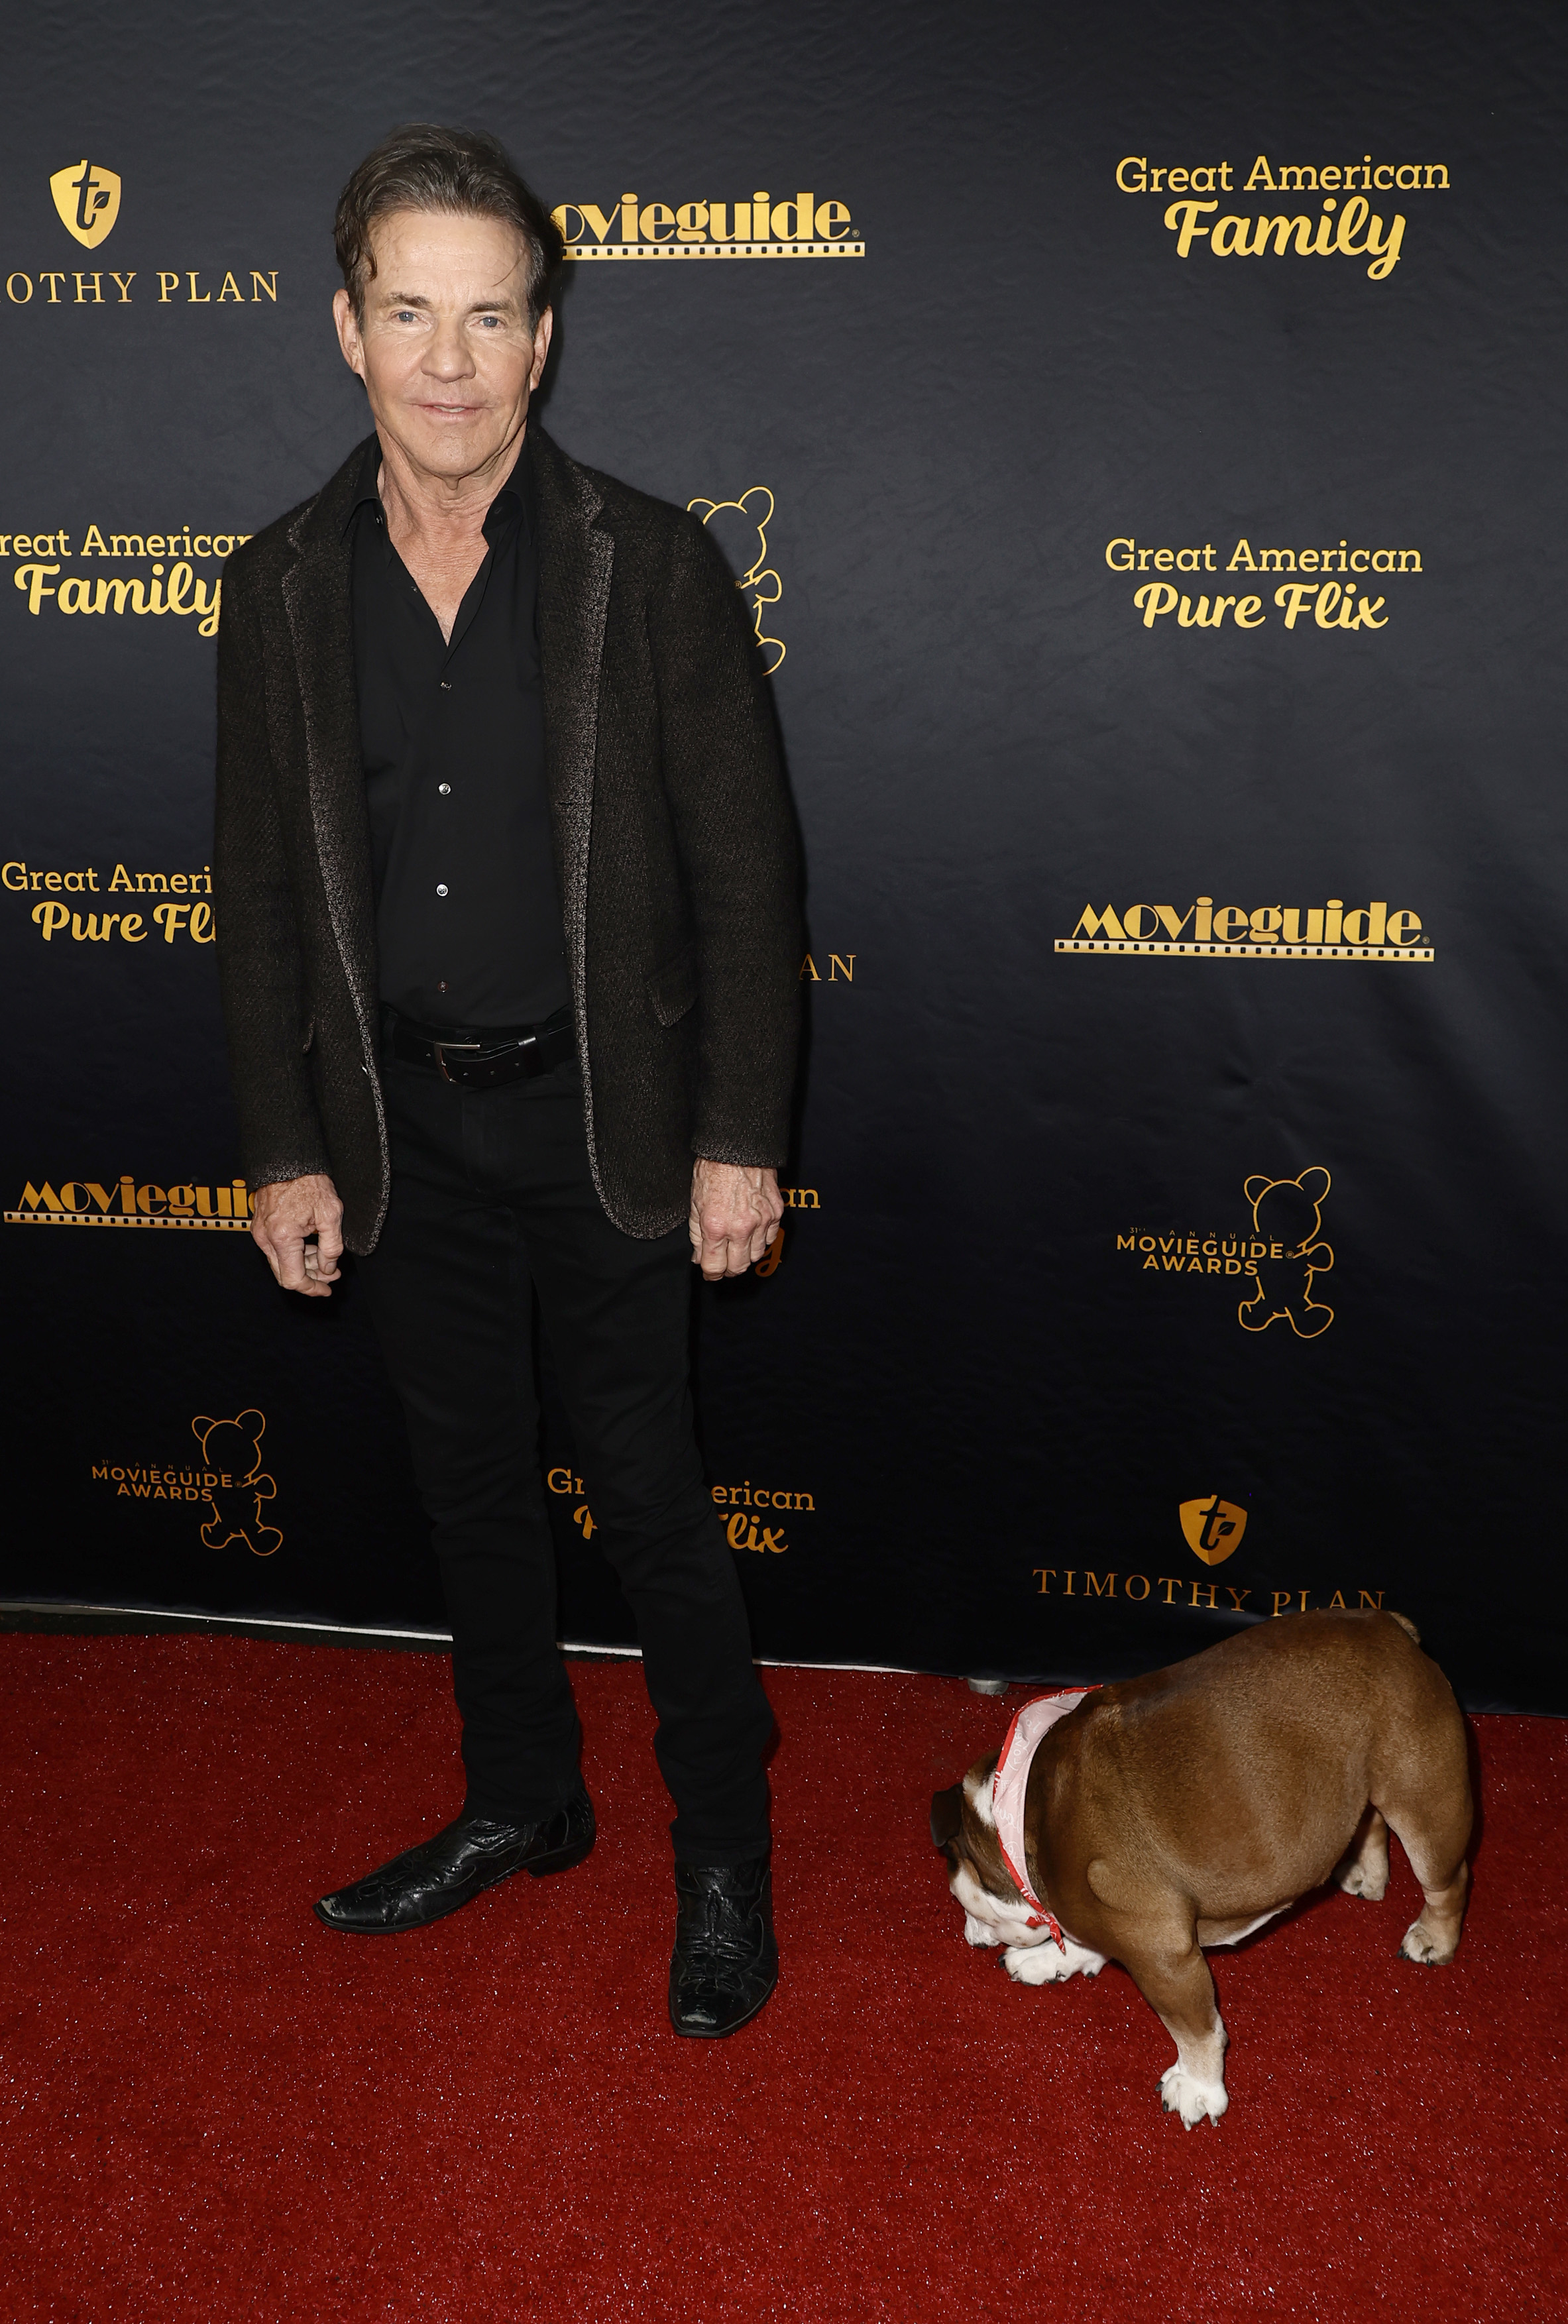 Man in a black shirt and blazer with jeans and a bulldog on a leash on the red carpet